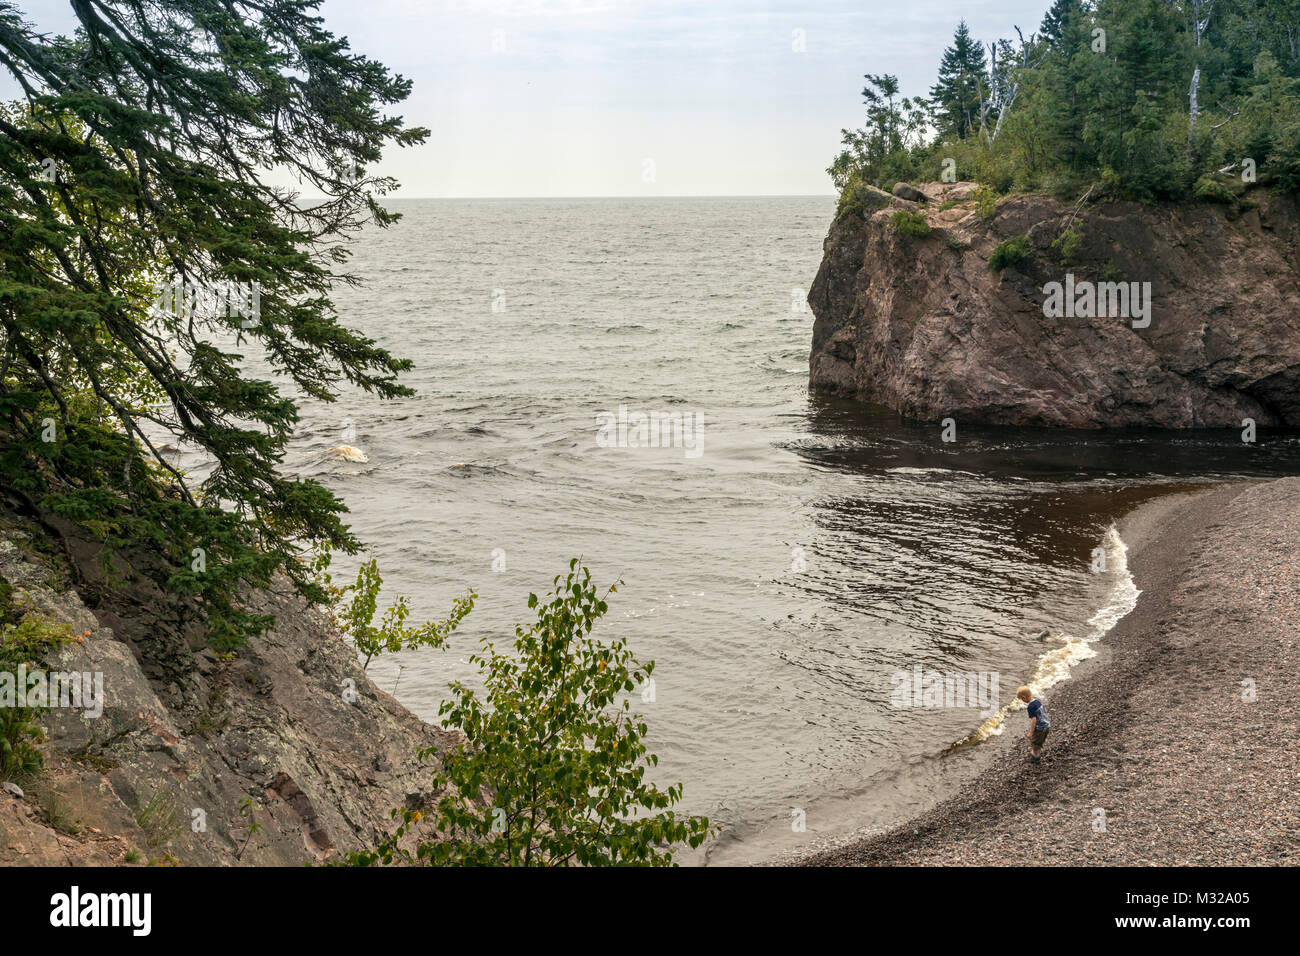 Silver Bay, Minnesota - A boy on the shore of Lake Superior, where the Baptism River enters the lake, in Tettegouche State Park. Stock Photo